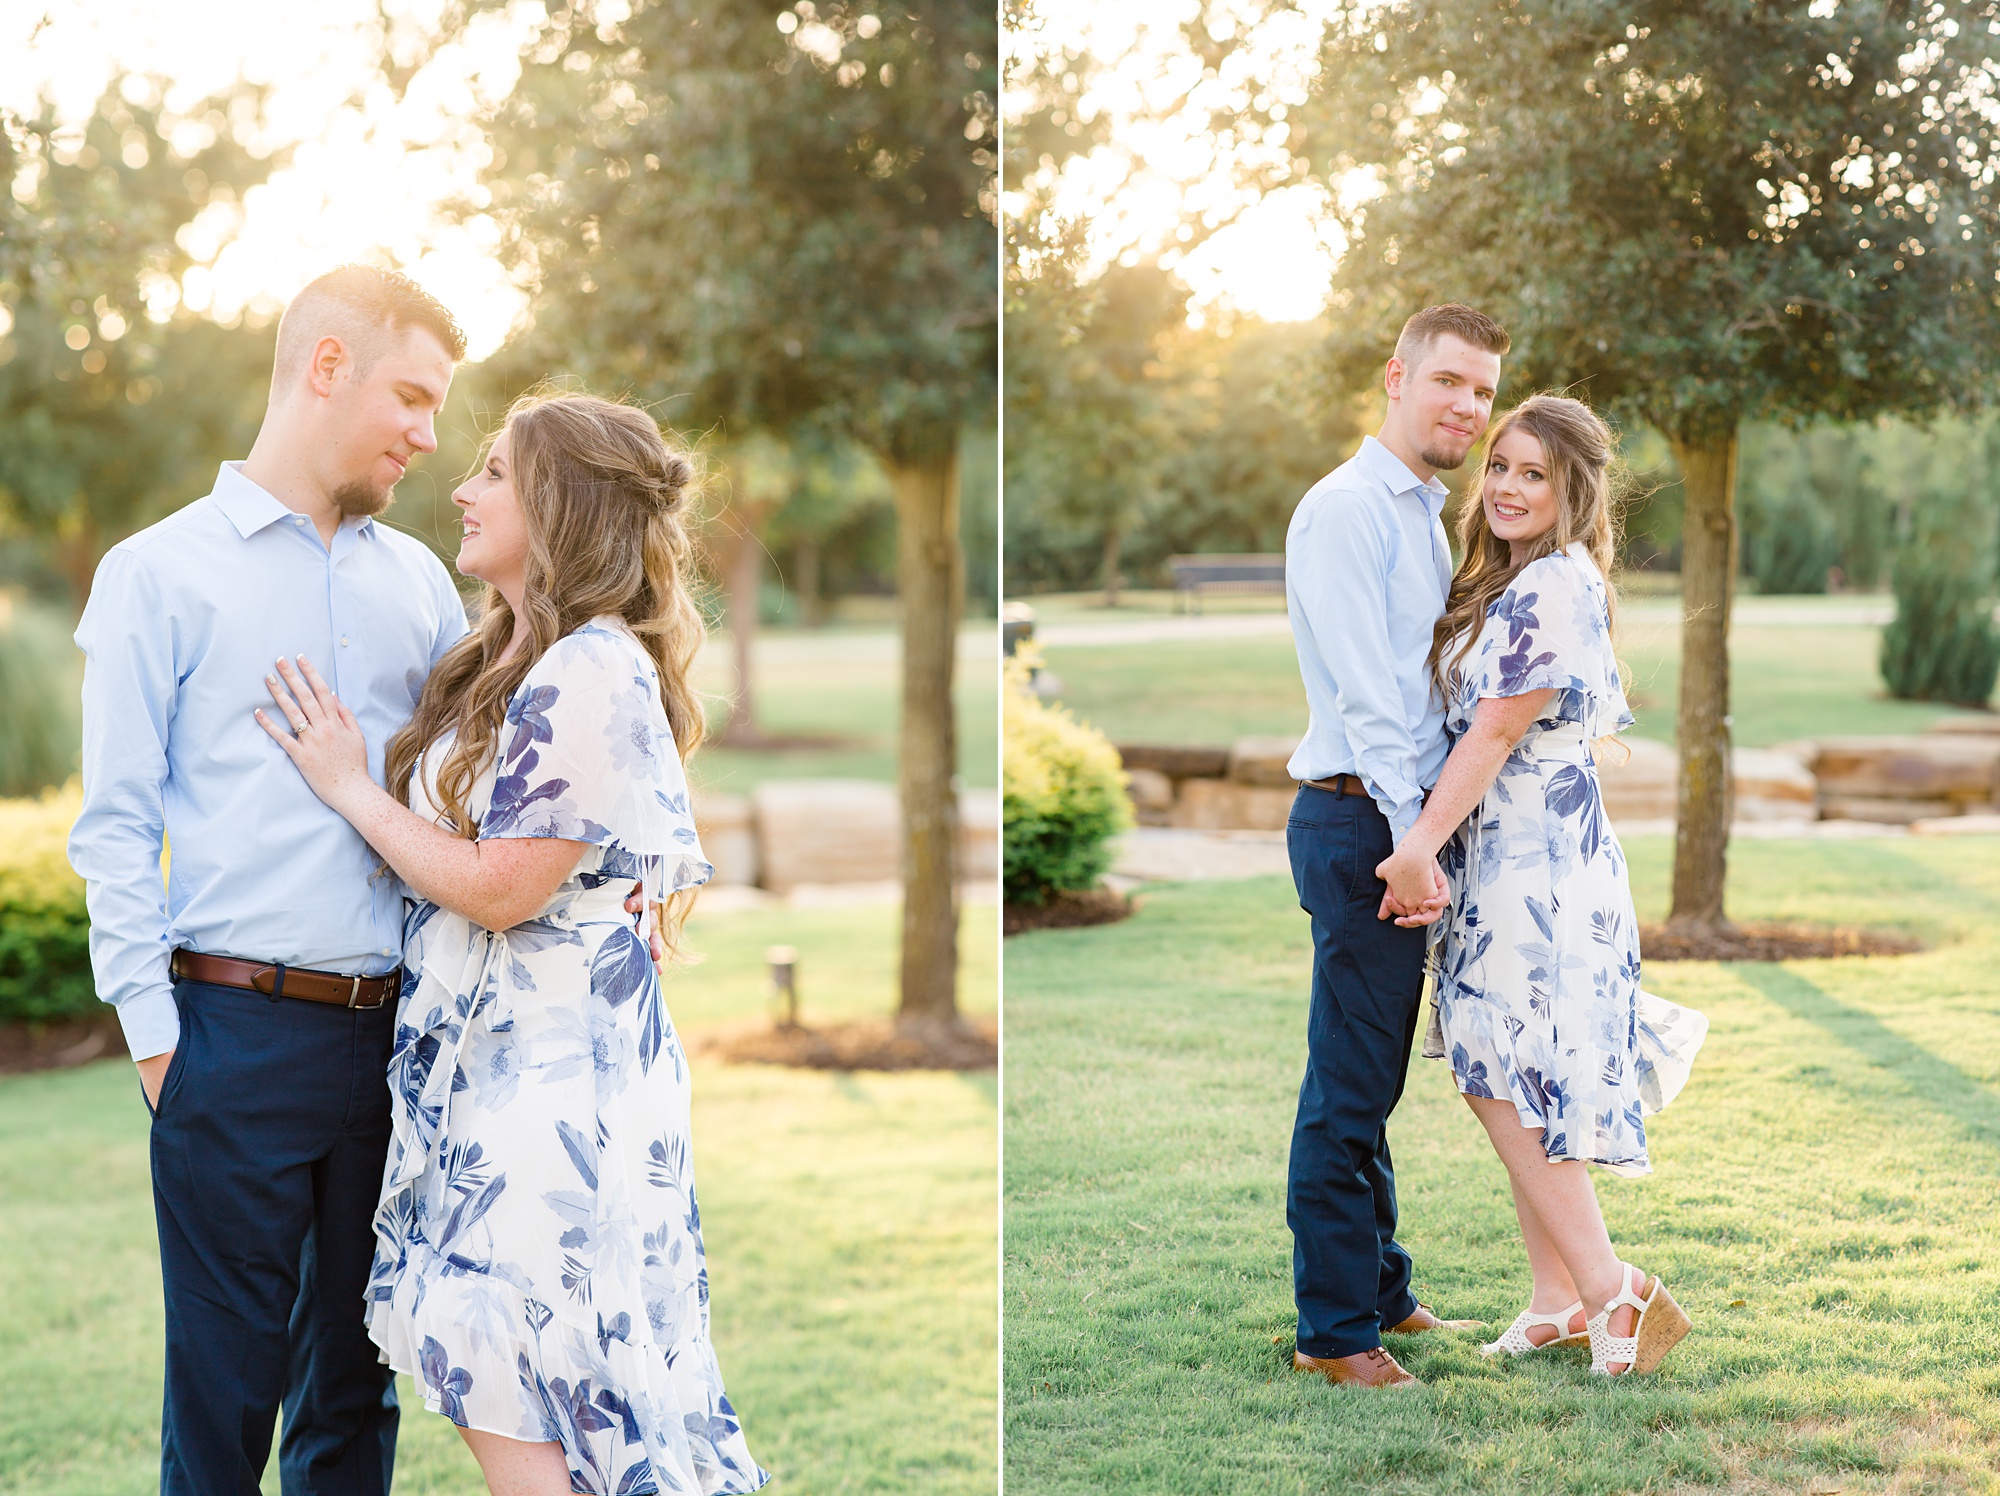 sunset engagement session in Dallas TX